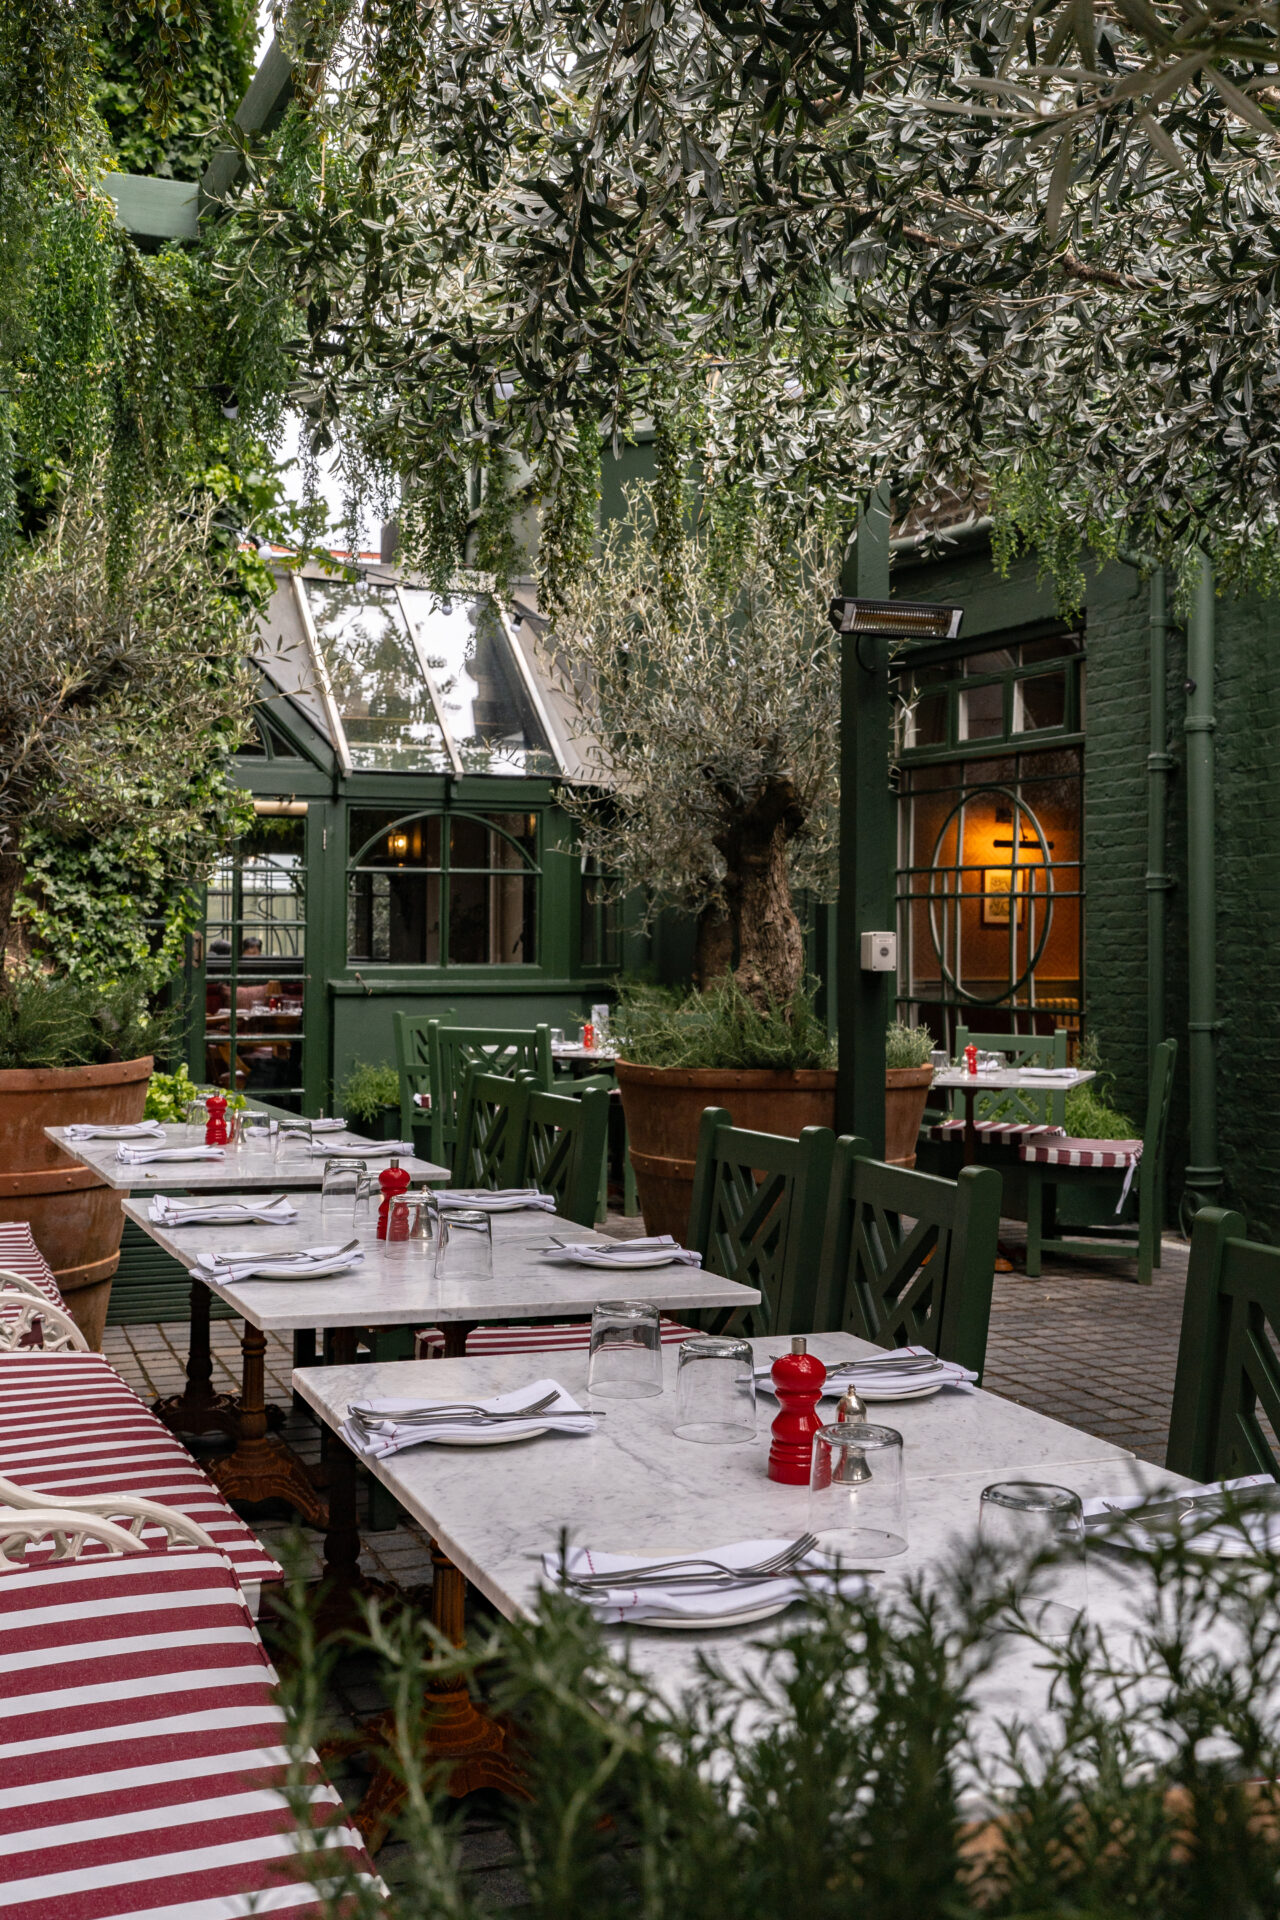 Best restaurants with outdoor seating in London | Princess Royal's terracr with marble-topped tables, red-and-white striped cushions, shaded by greenery